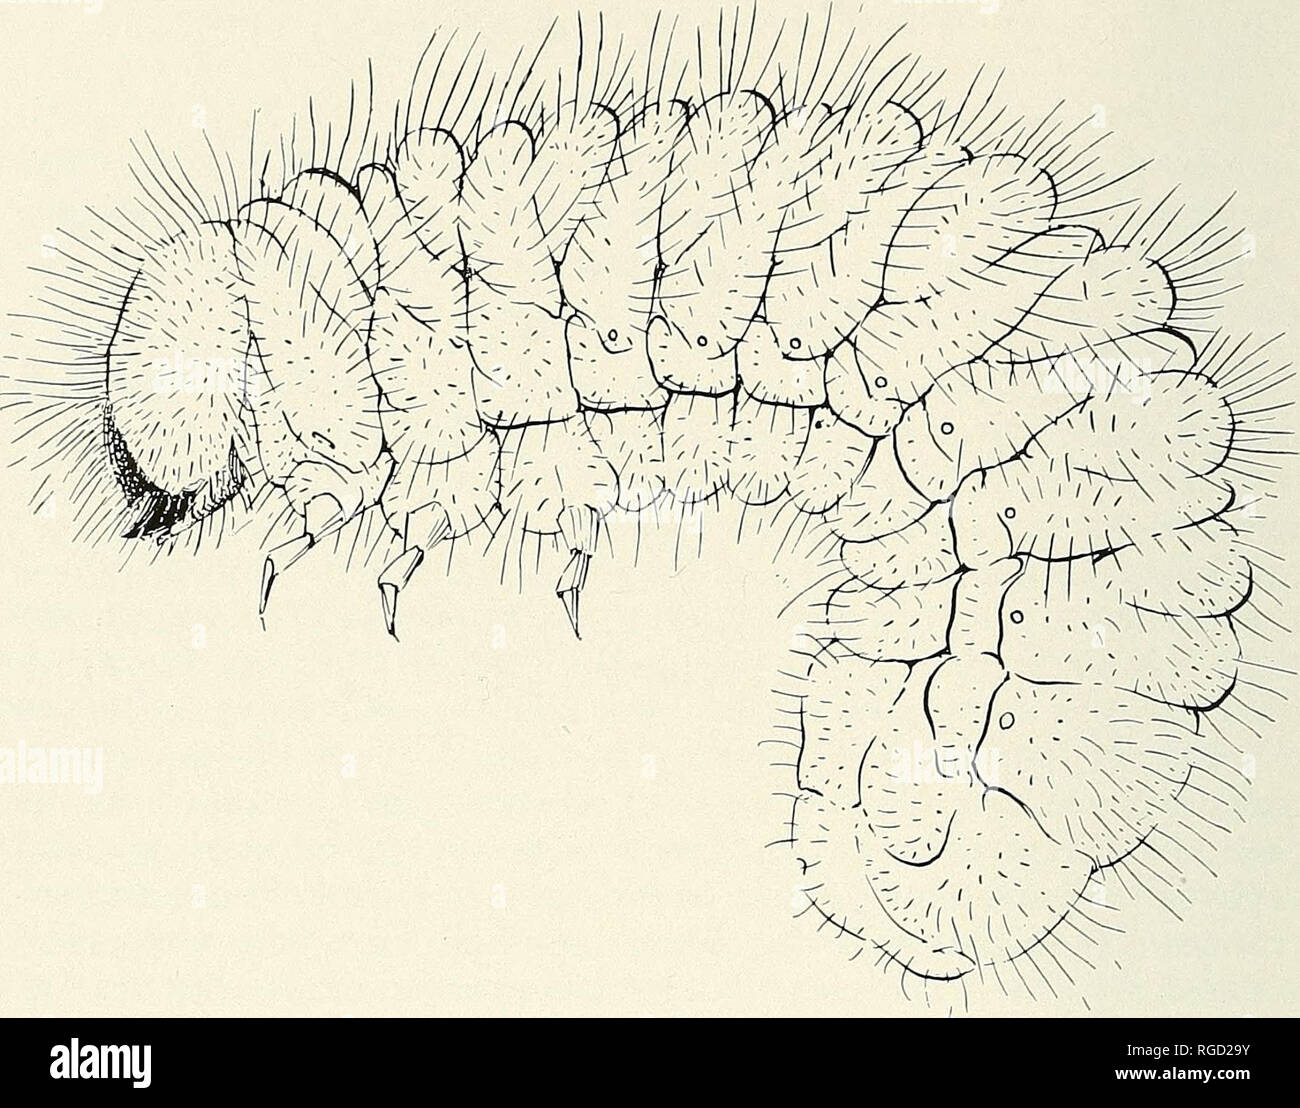 . Bulletin of the Southern California Academy of Sciences. Science; Natural history; Natural history. PLATE 12 Larva of Ptinus californicus Pic. x 18. prefer to nest in old burrows or natural crevices and rarely dig their own tunnels. They are, however, much smaller than lig- naria and in order to fill the old burrows which they appropriate it is necessary to build groups of cells. These cells are complete, although adjacent cells may share a common wall. Unlike lig- naria the nest cavity itself is not clased by mud plugs. The aver- age size of the cells of exilis is 4 x 8 mm. Anthophora edzva Stock Photo